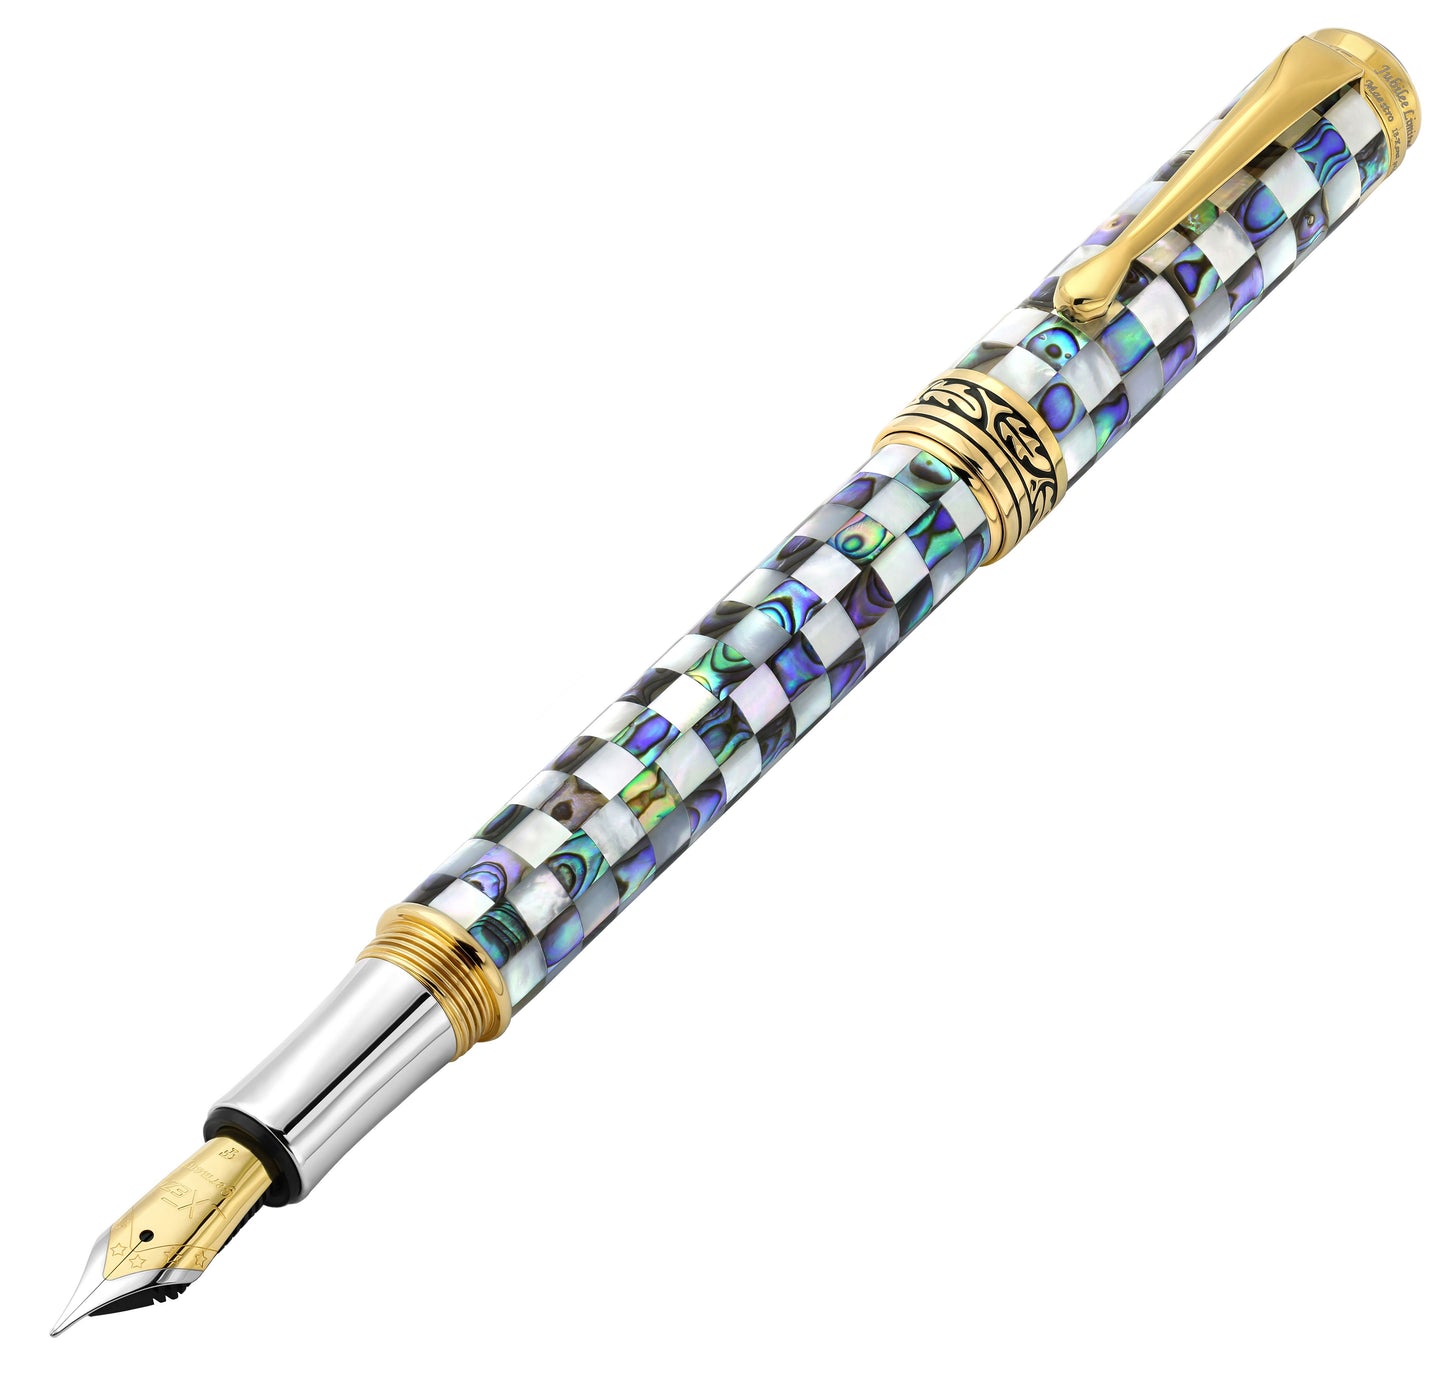 Maestro Jubilee Classic Of The Ocean Fine Fountain Pen (Gold) uncapped at an angle